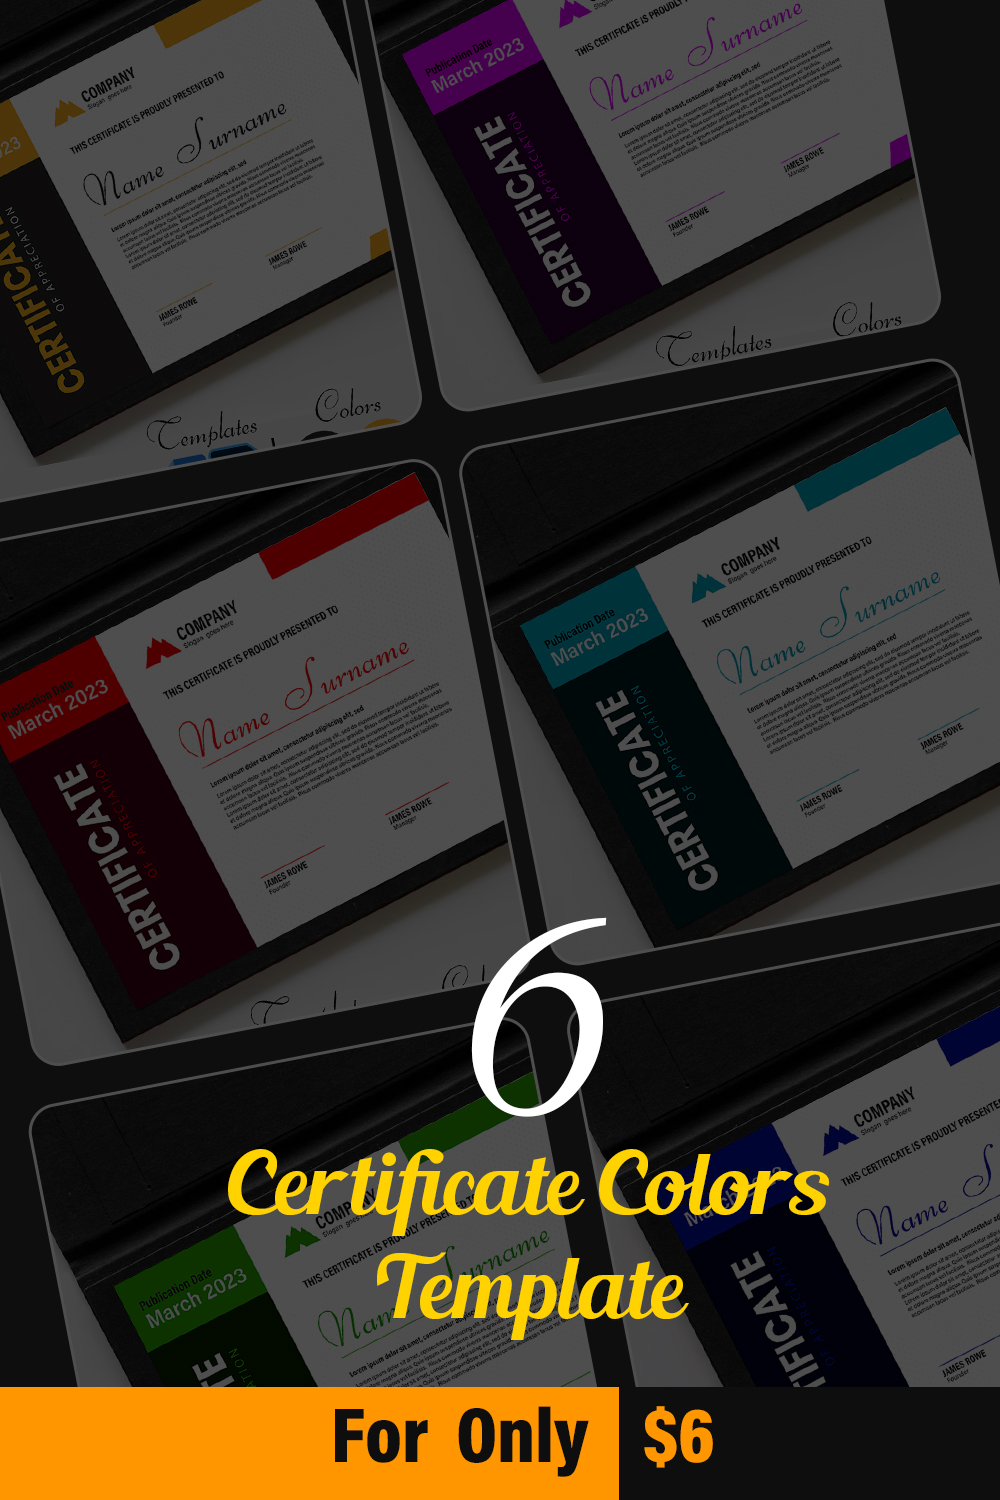 6 PSD certificate Template - Only $6 pinterest preview image.